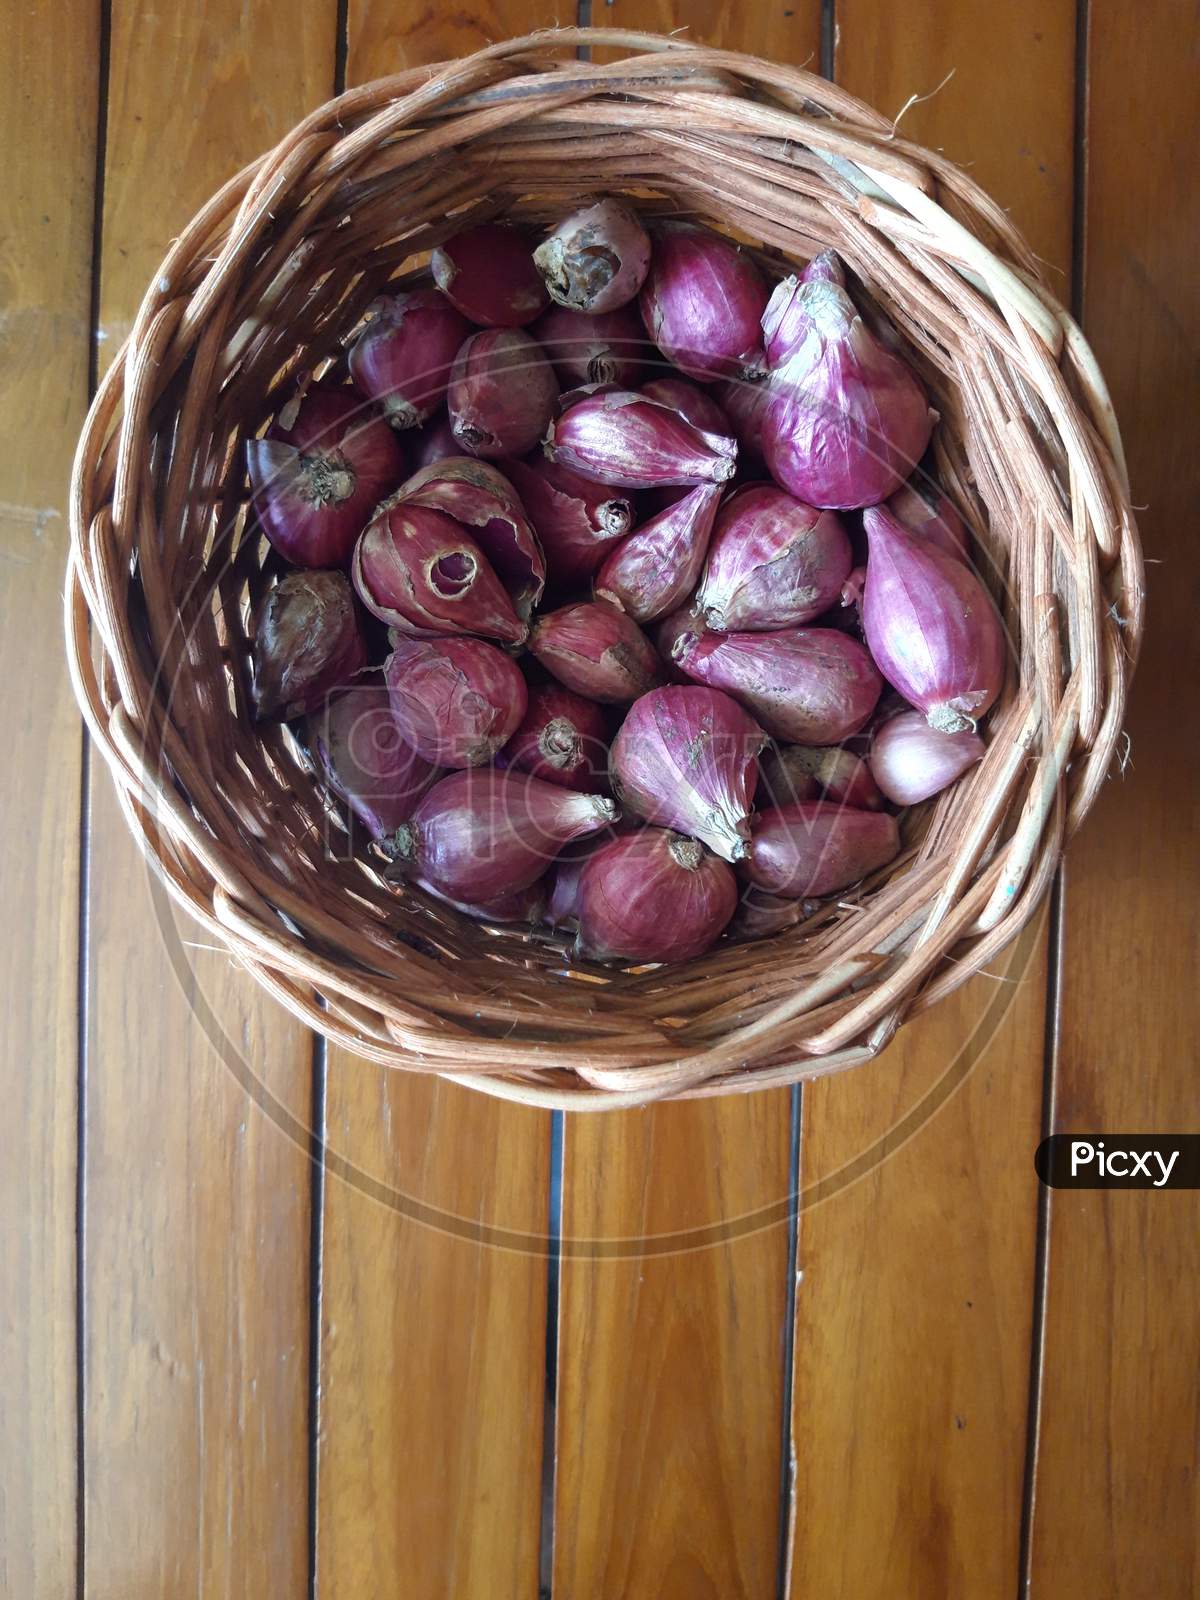 Shallots In A Wicker Basket With A Brown Wooden Base